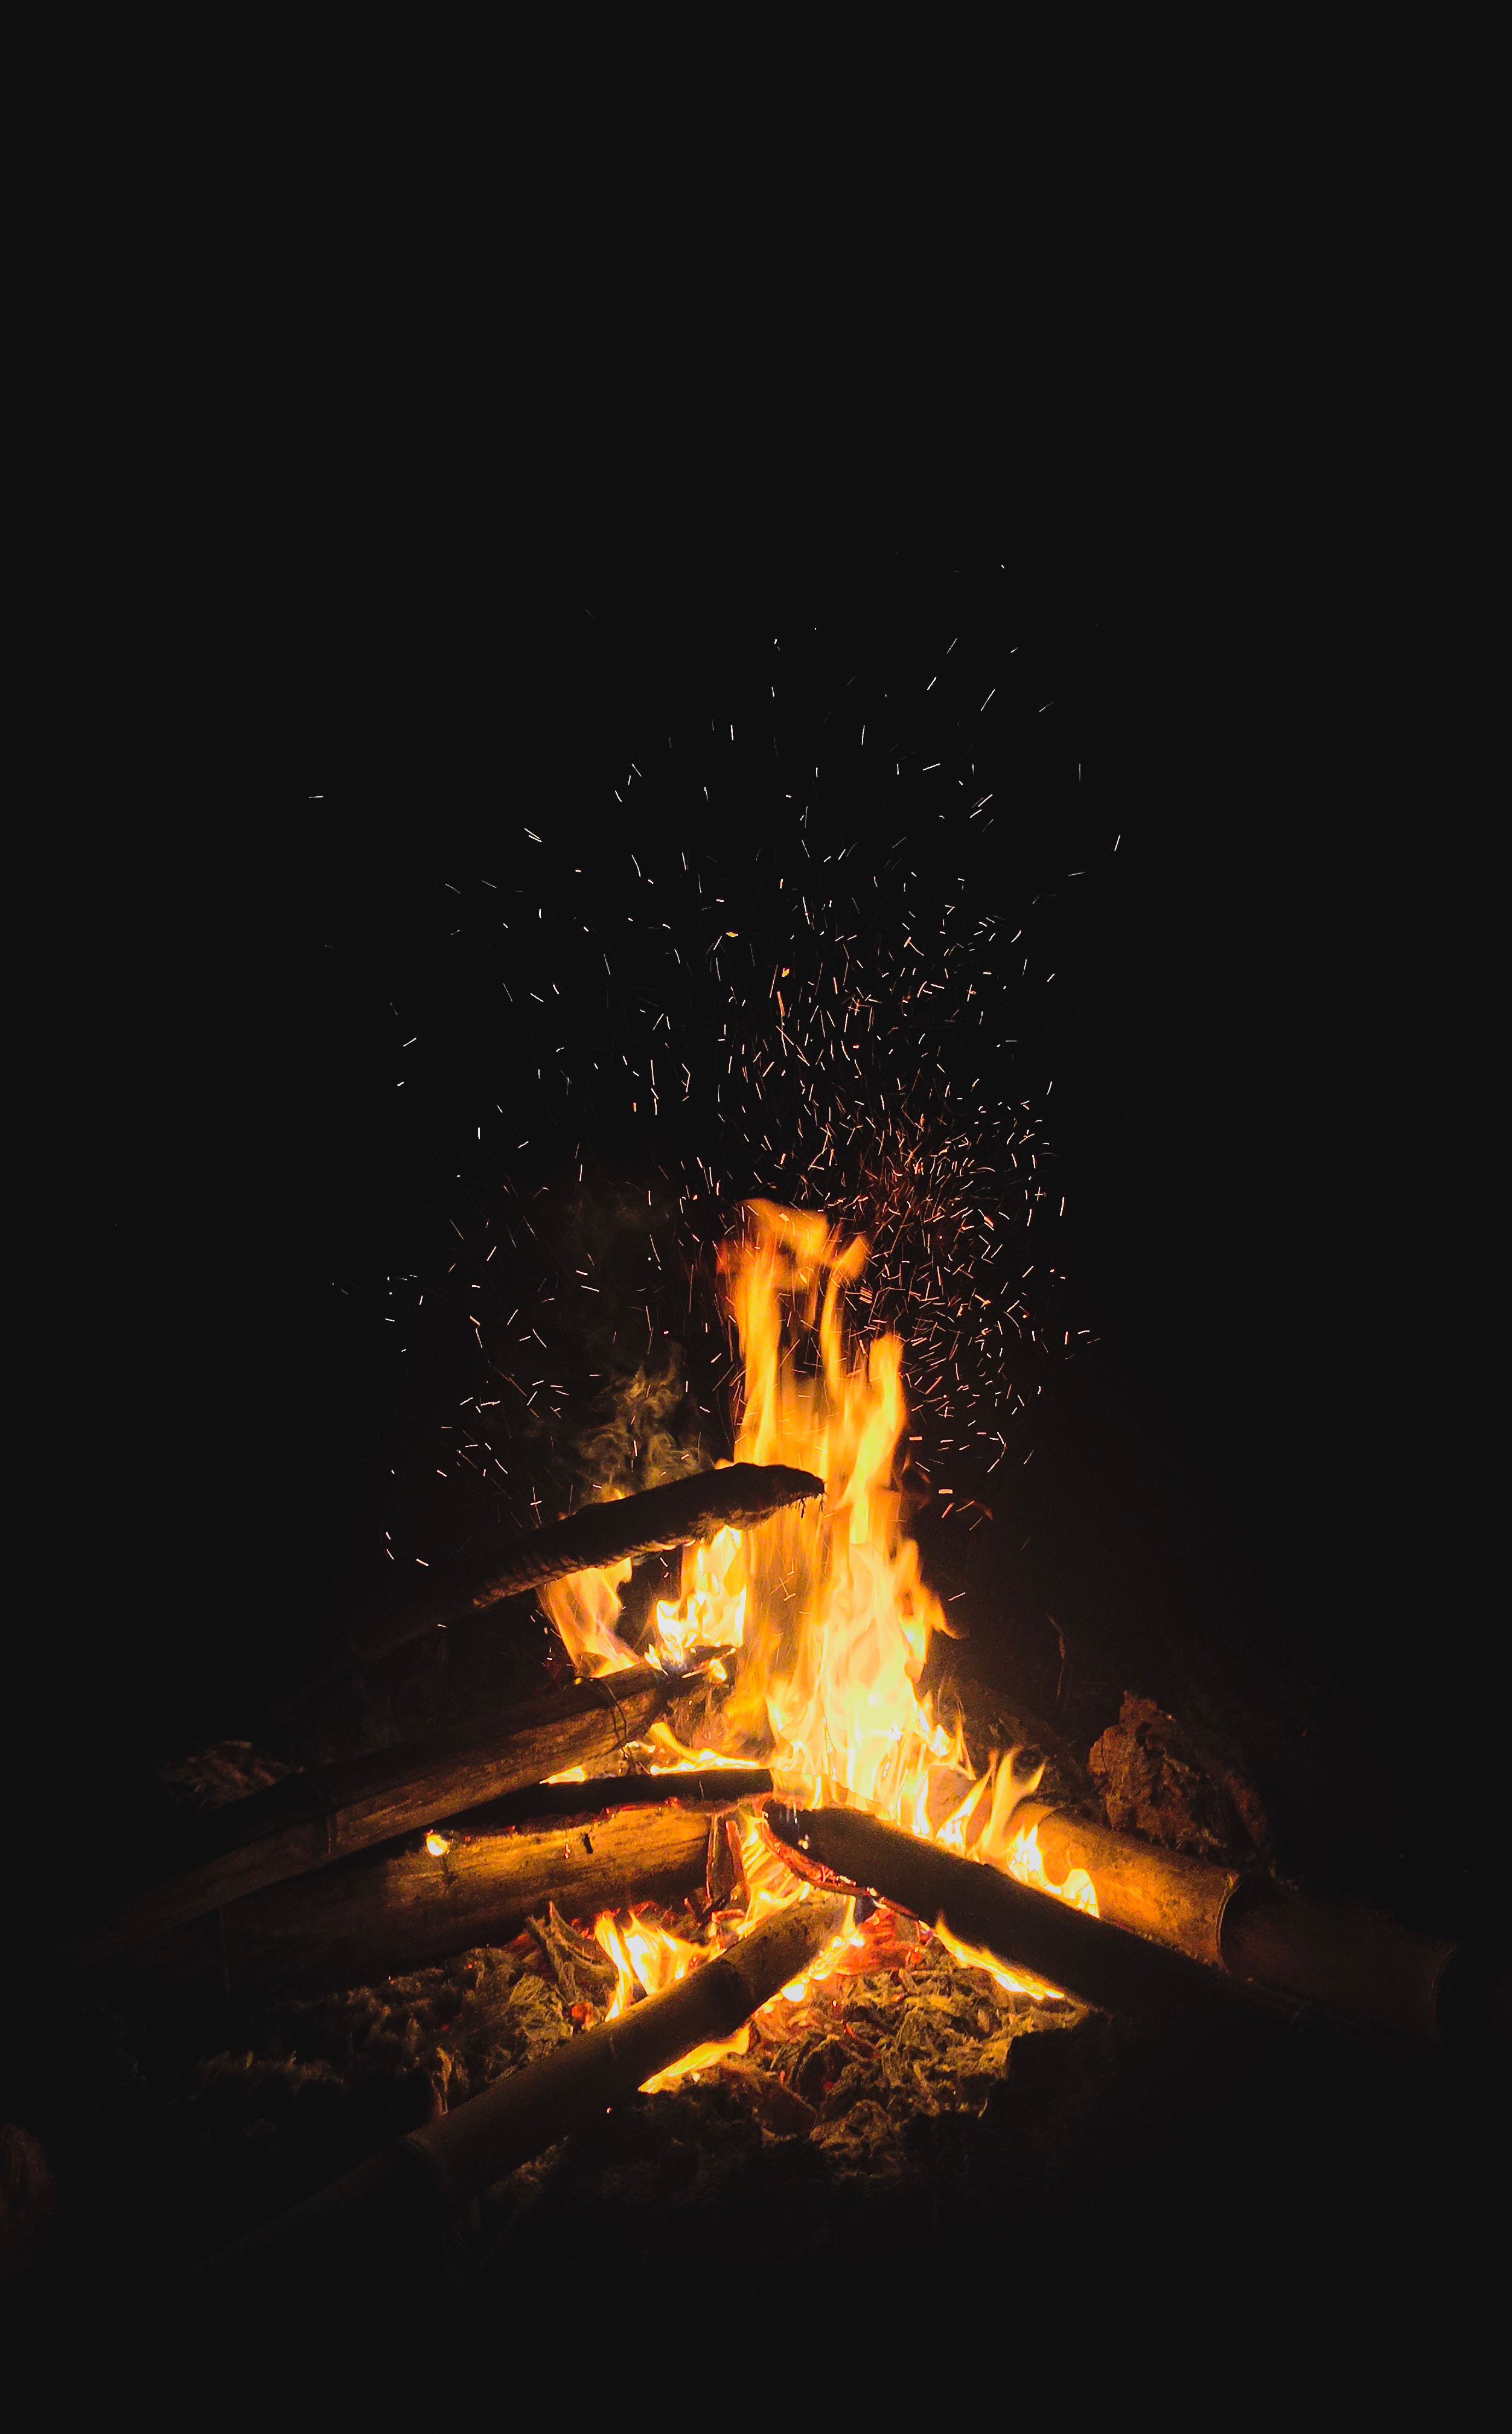 75943 download wallpaper flame, fire, bonfire, dark, sparks, firewood screensavers and pictures for free